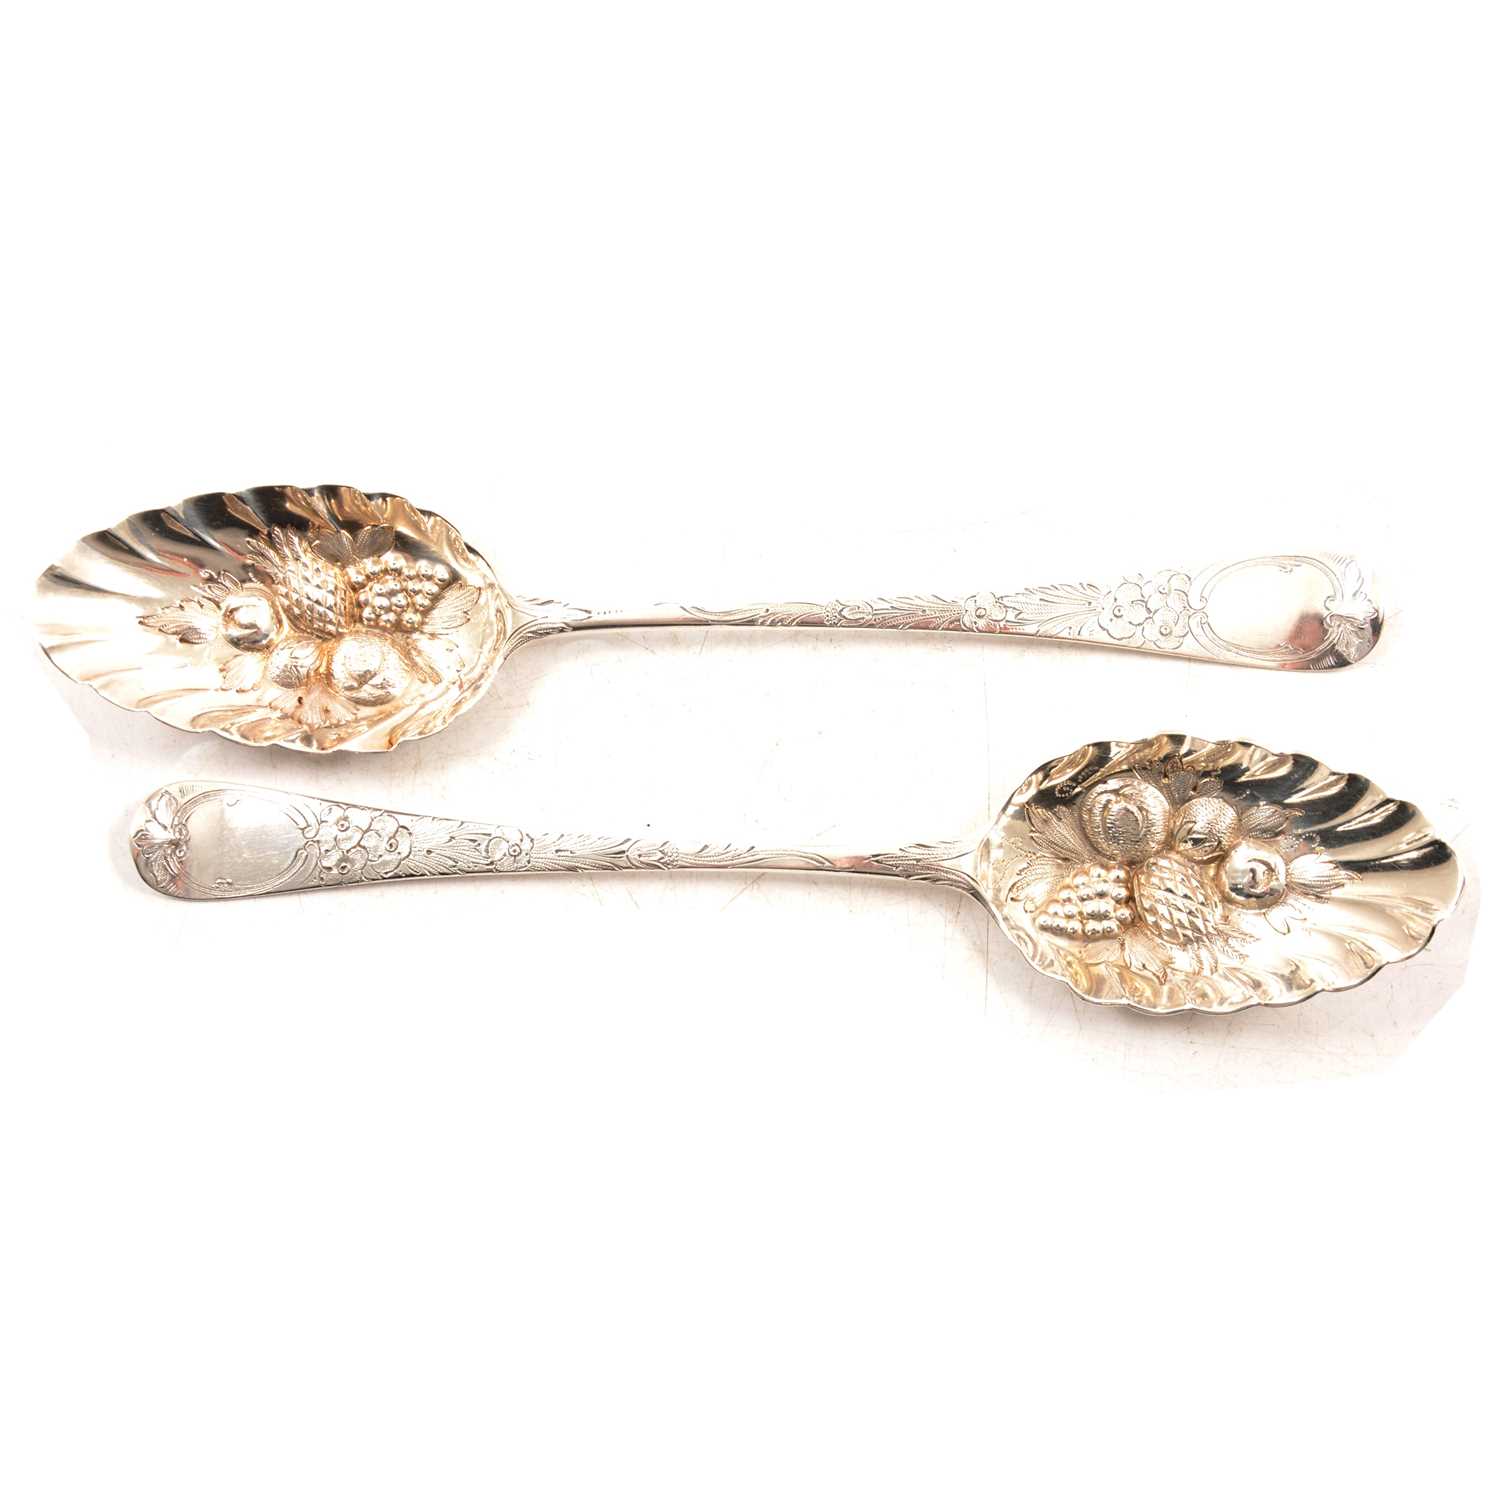 Matched pair of Georgian silver berry spoons, William Eley I & William Fearn, London 1803 and 1804.